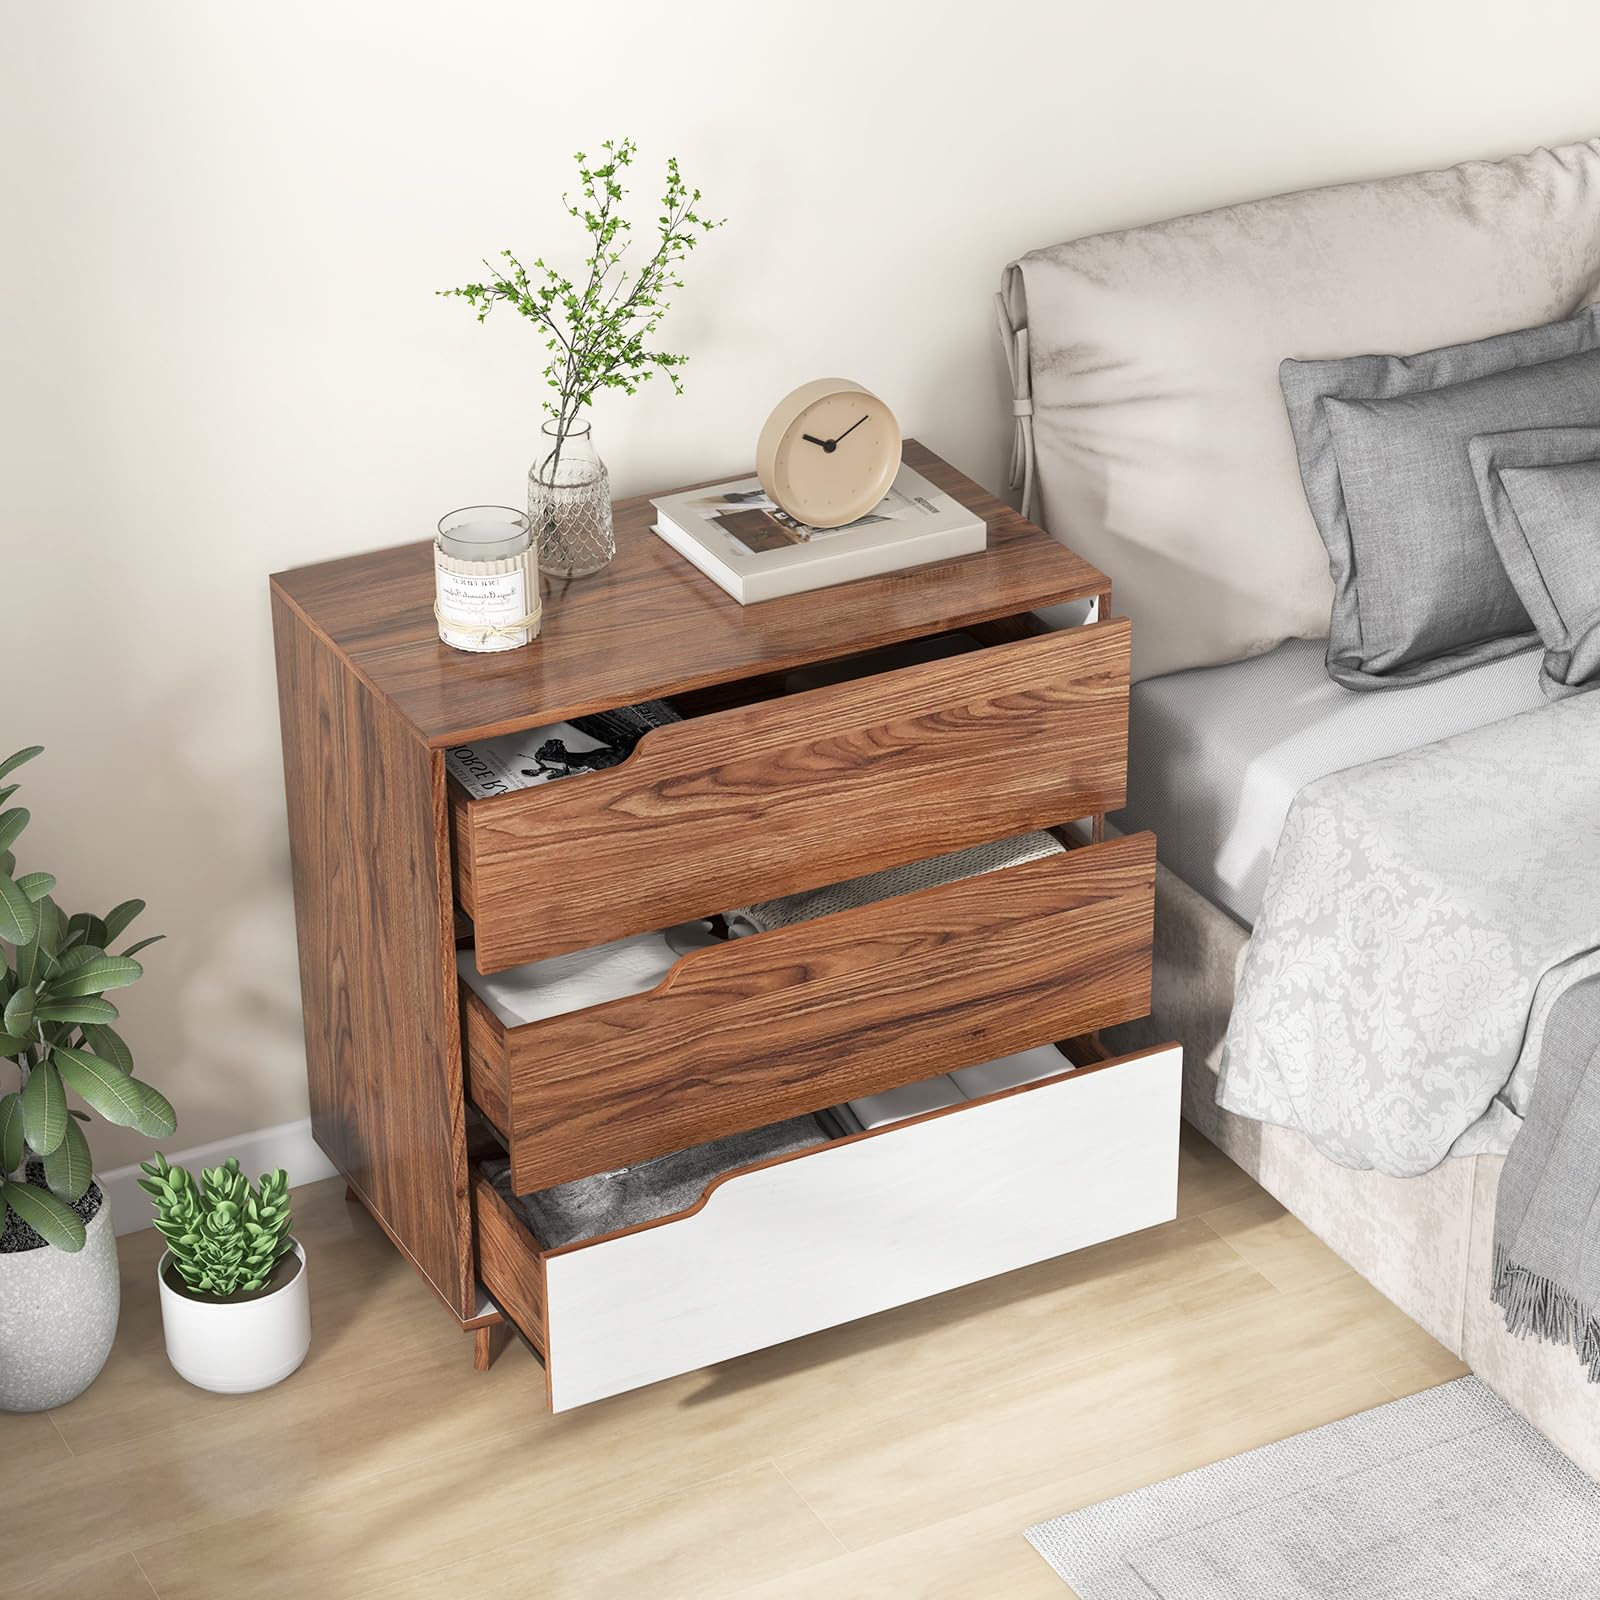 Giantex 3-Drawer Dresser for Bedroom - Small Chest of Drawers, Rustic Farmhouse Storage Cabinet, Walnut & White